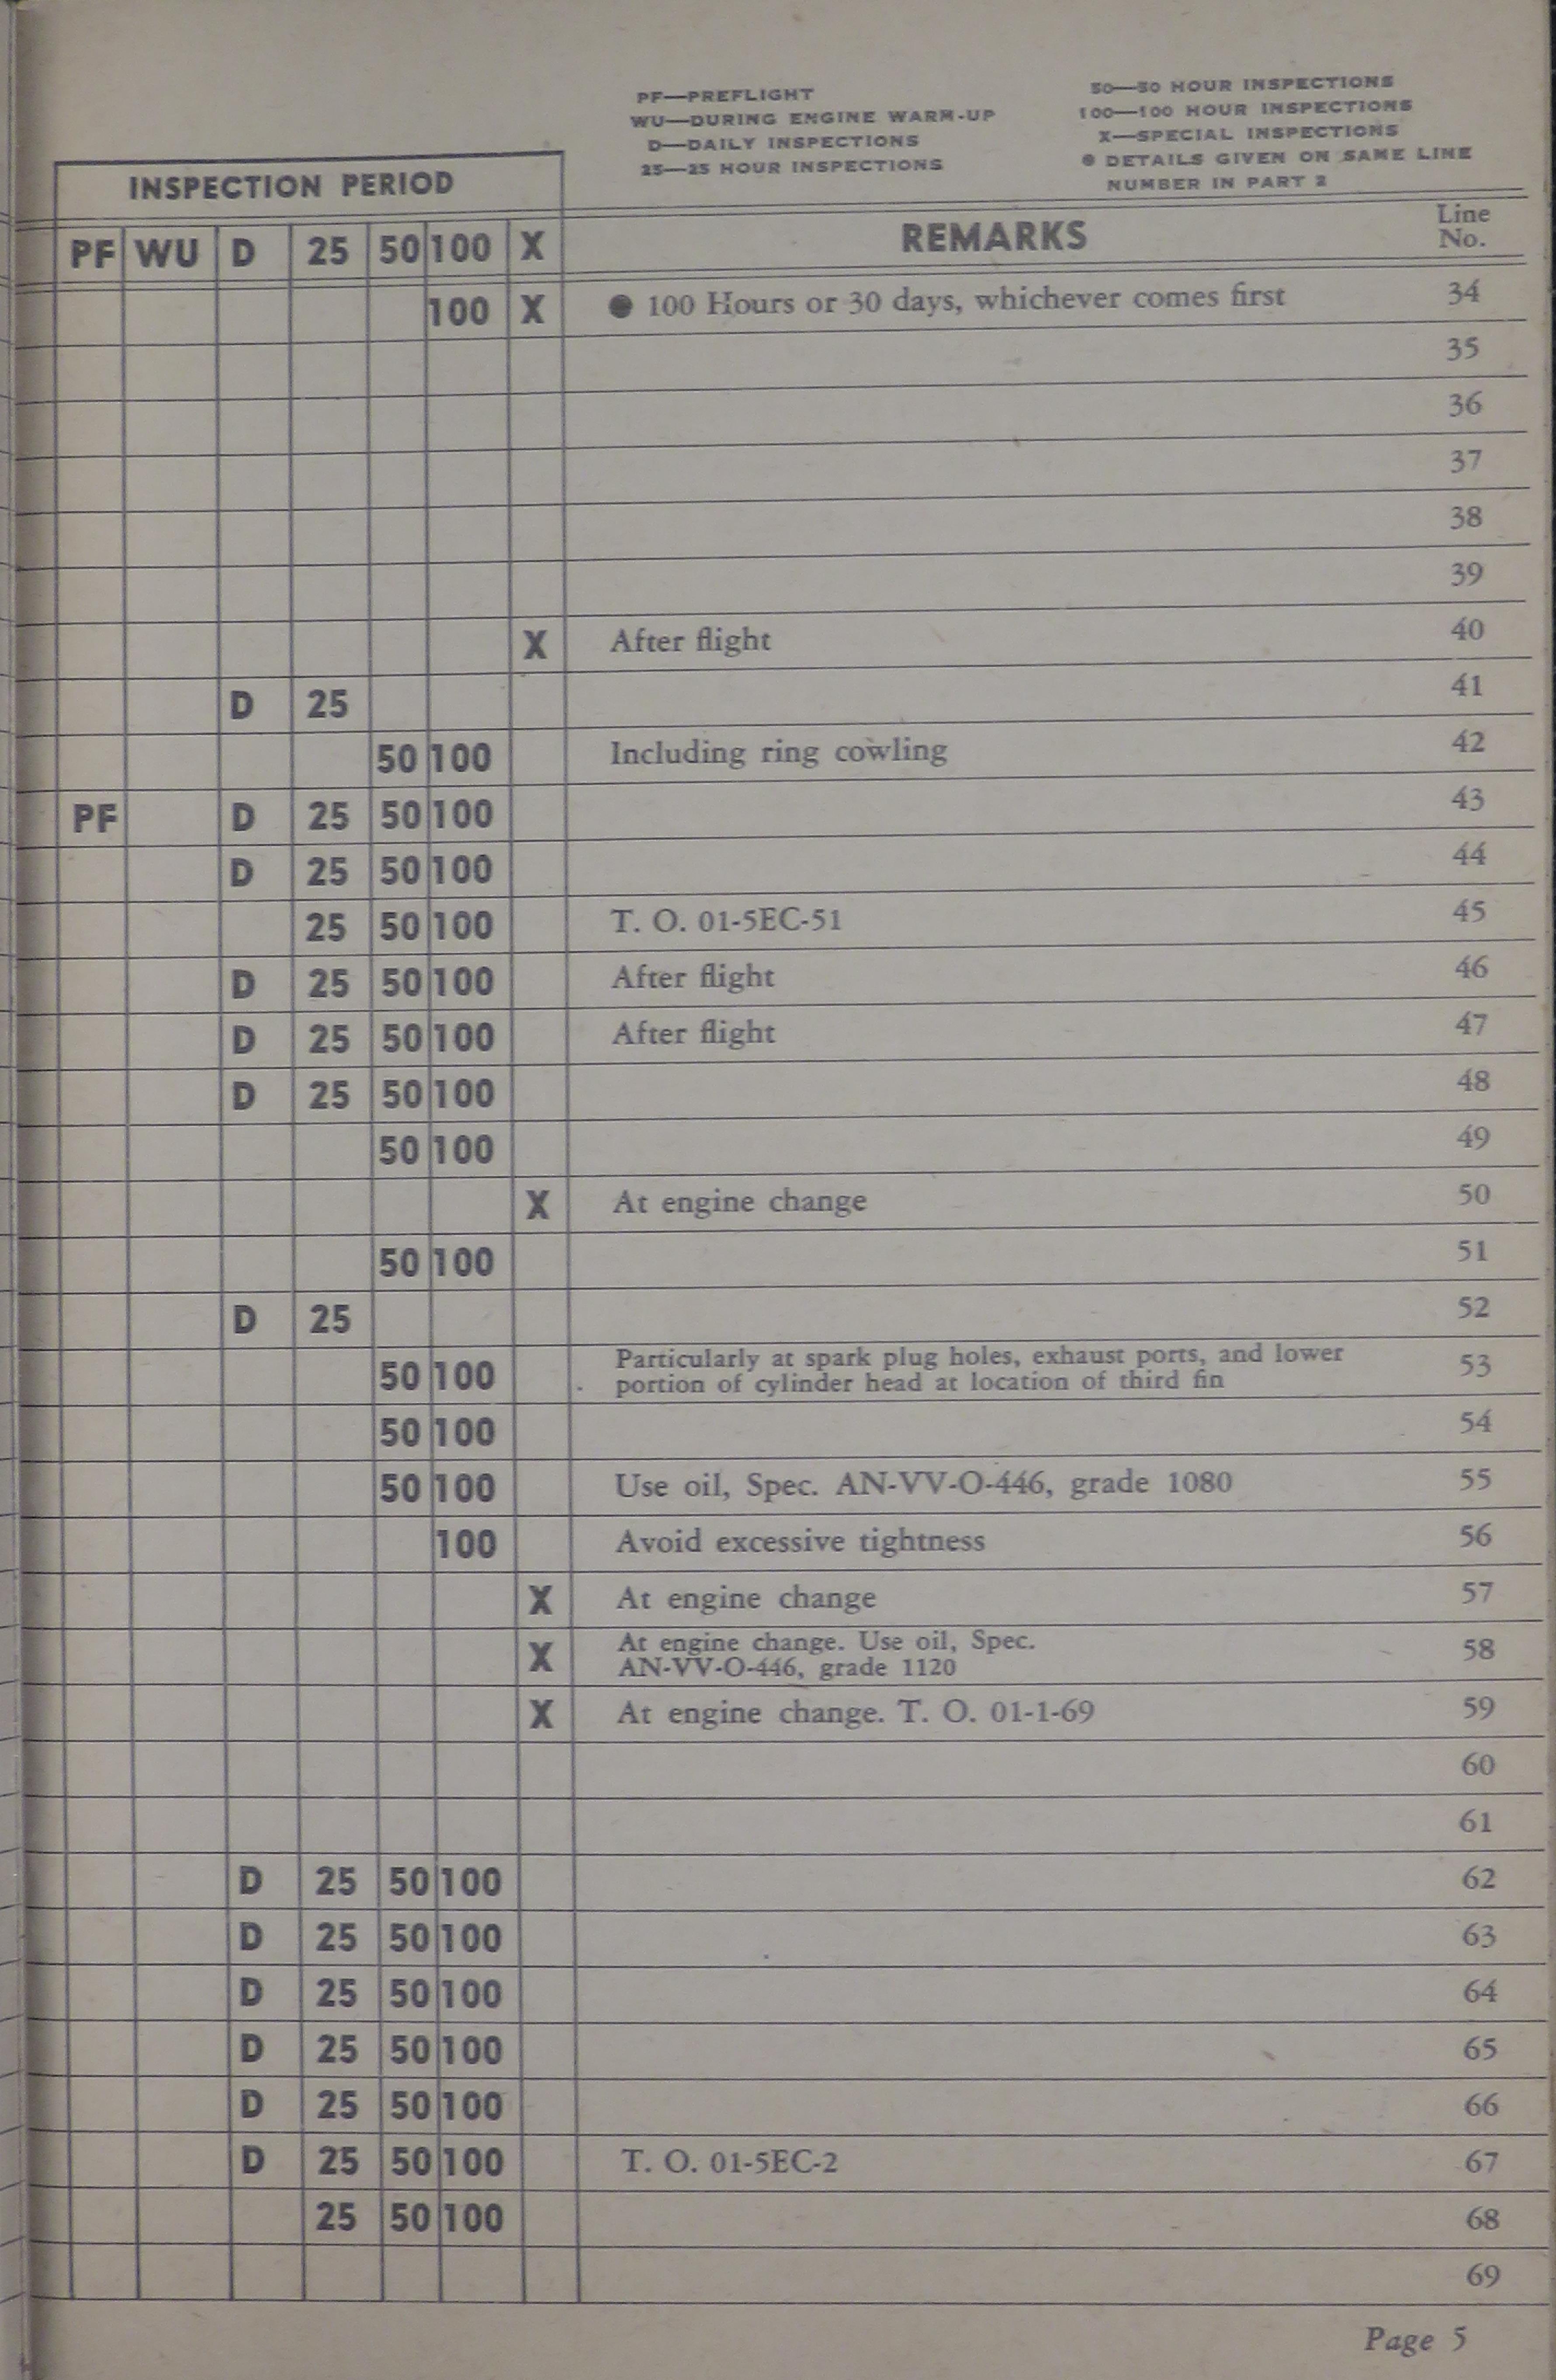 Sample page 9 from AirCorps Library document: Aircraft Inspection and Maintenance Guide for B-24D, E, G, H, and J Aircraft